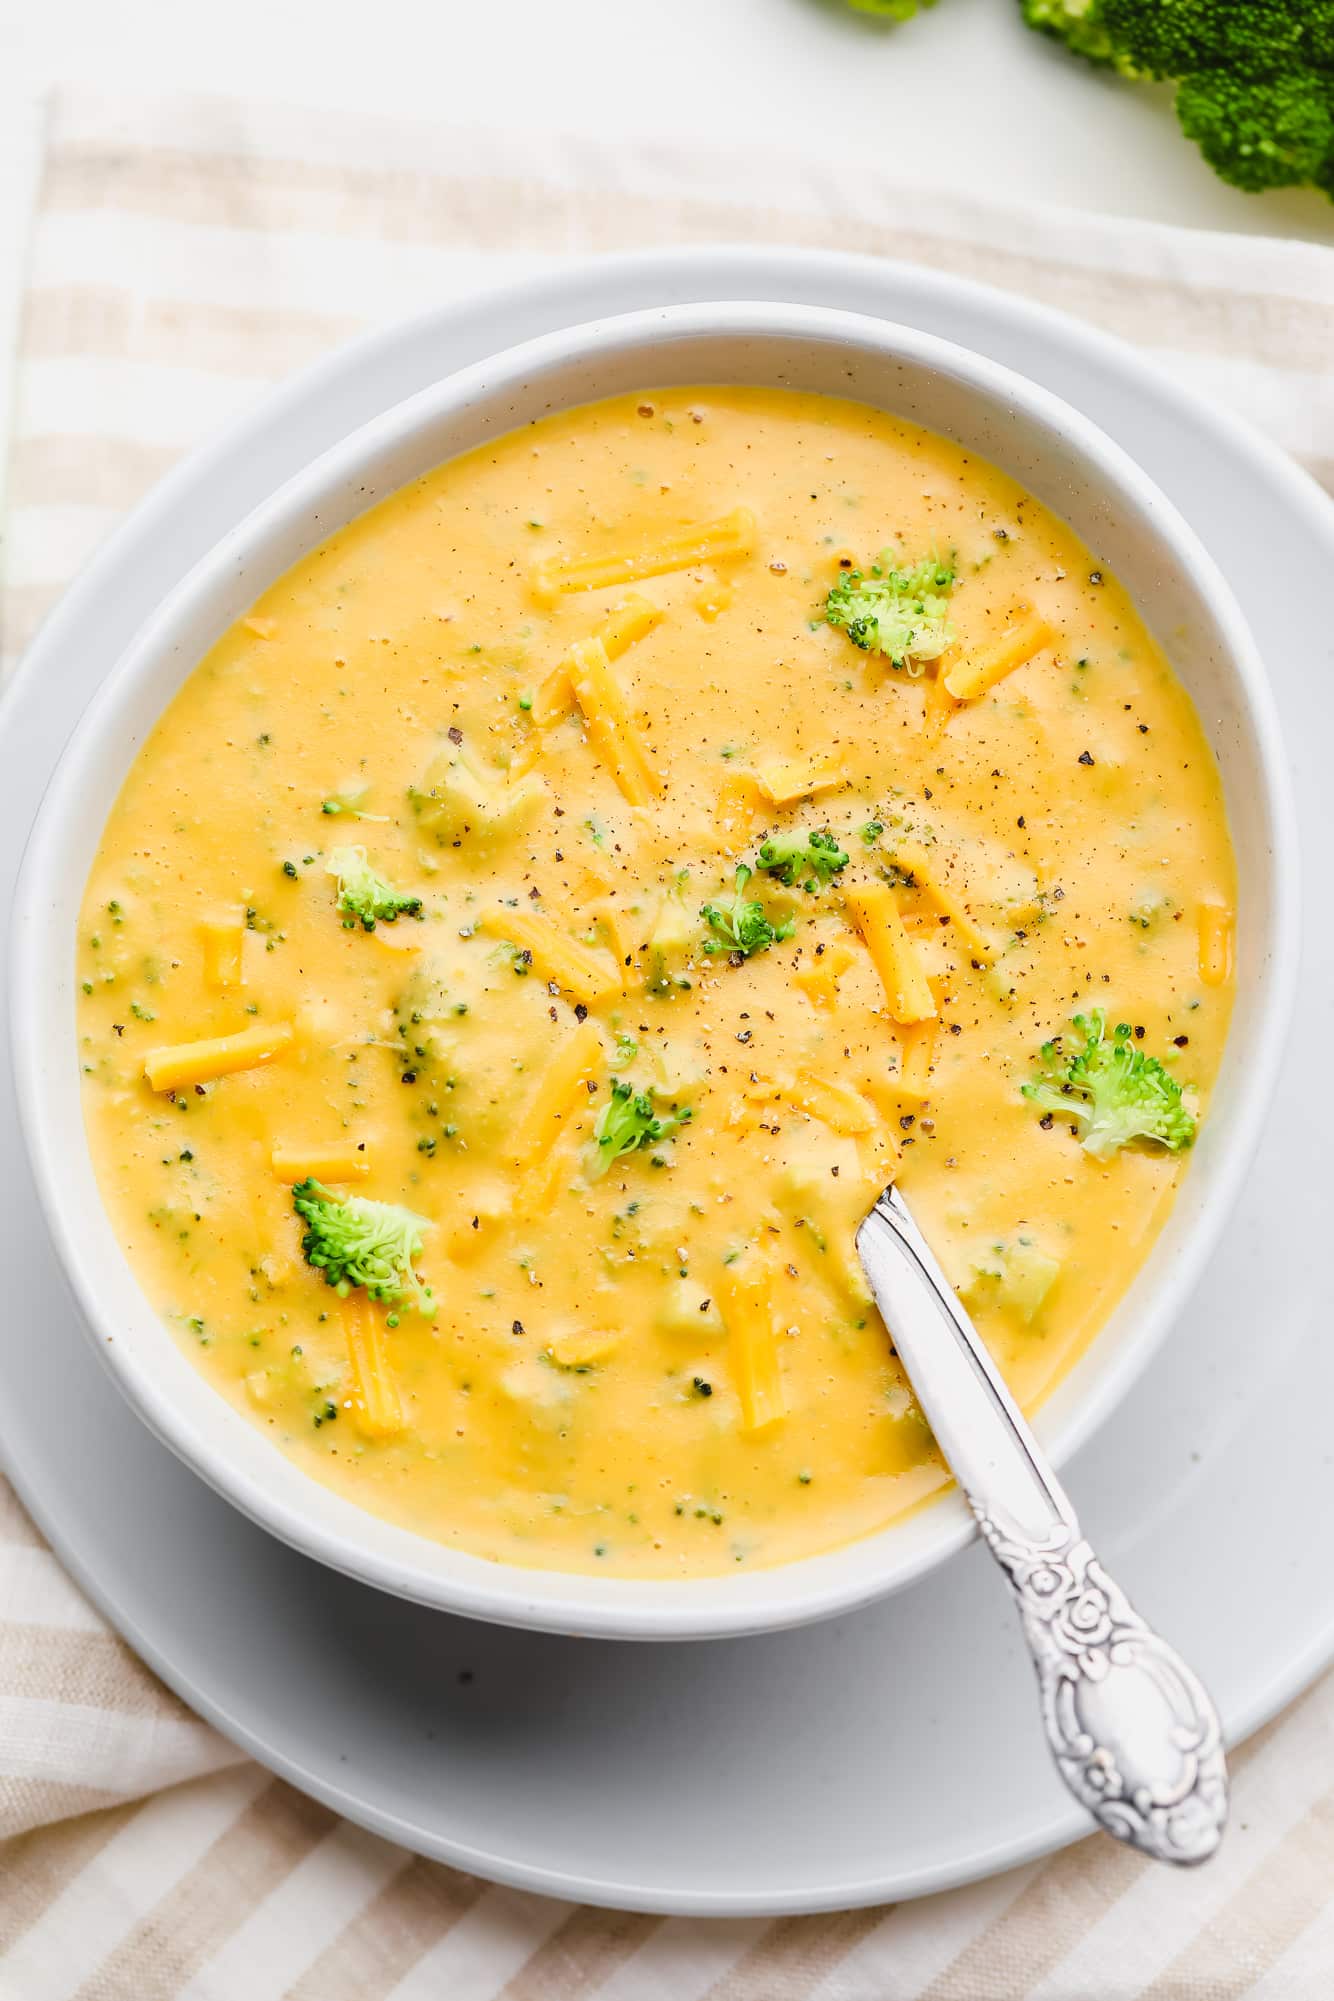 a white bowl filled with vegan broccoli cheddar soup and a spoon.